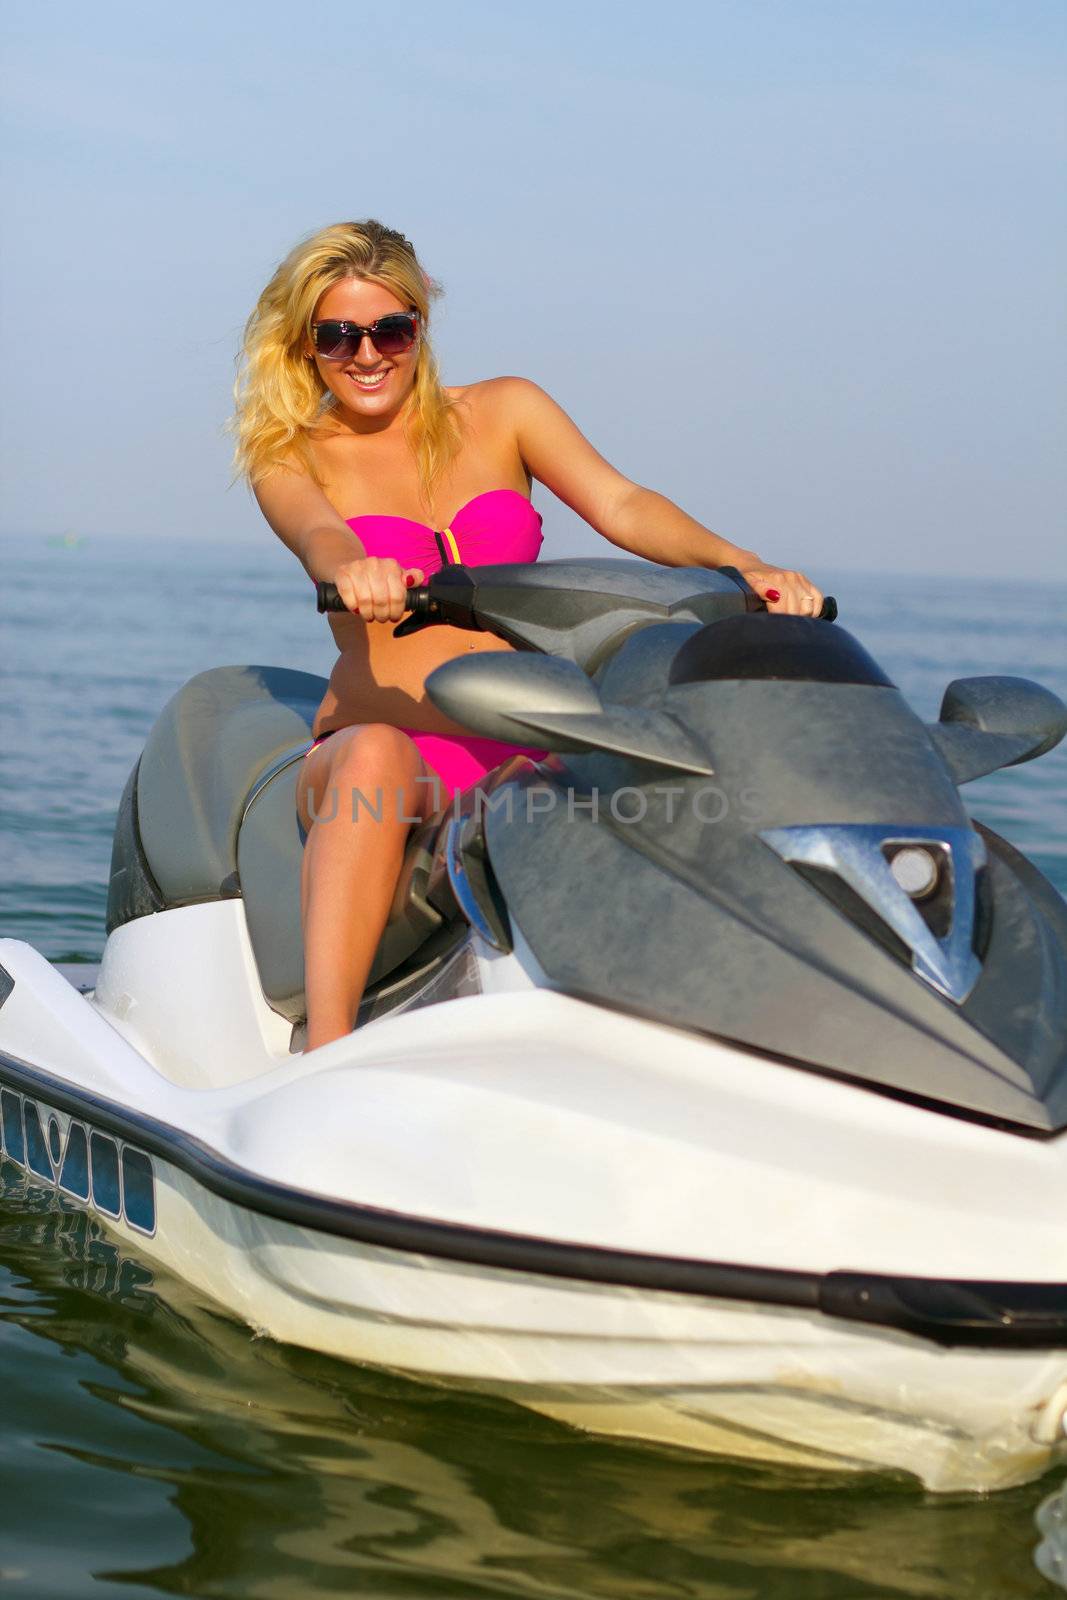 Beautiful smiling young woman on a jet ski